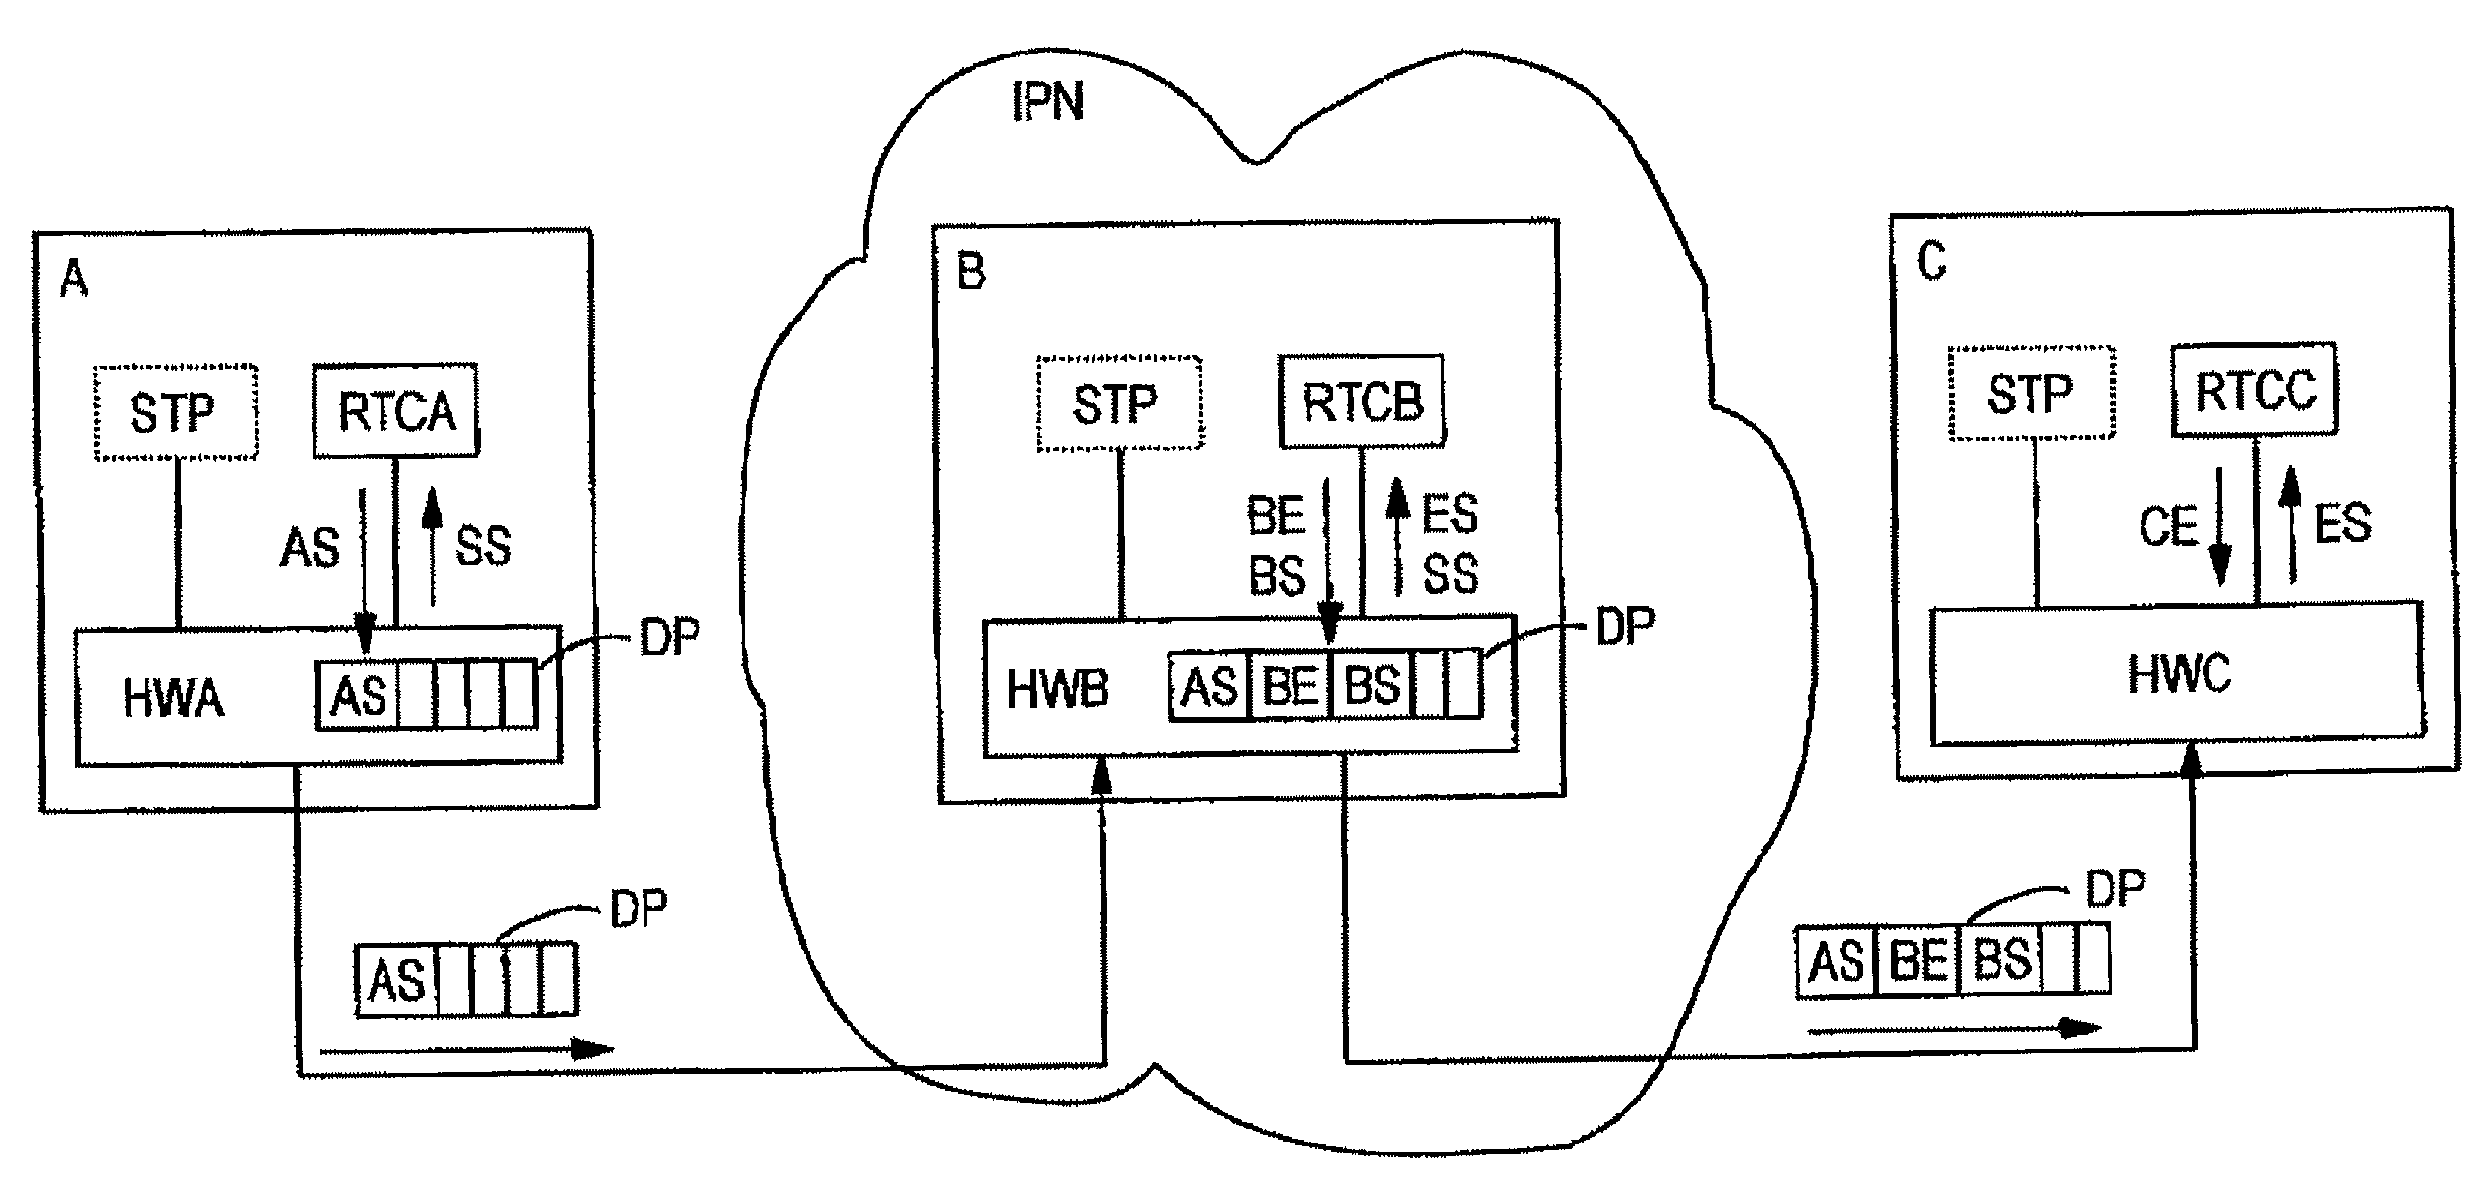 Method for transmitting time information via a data packet network